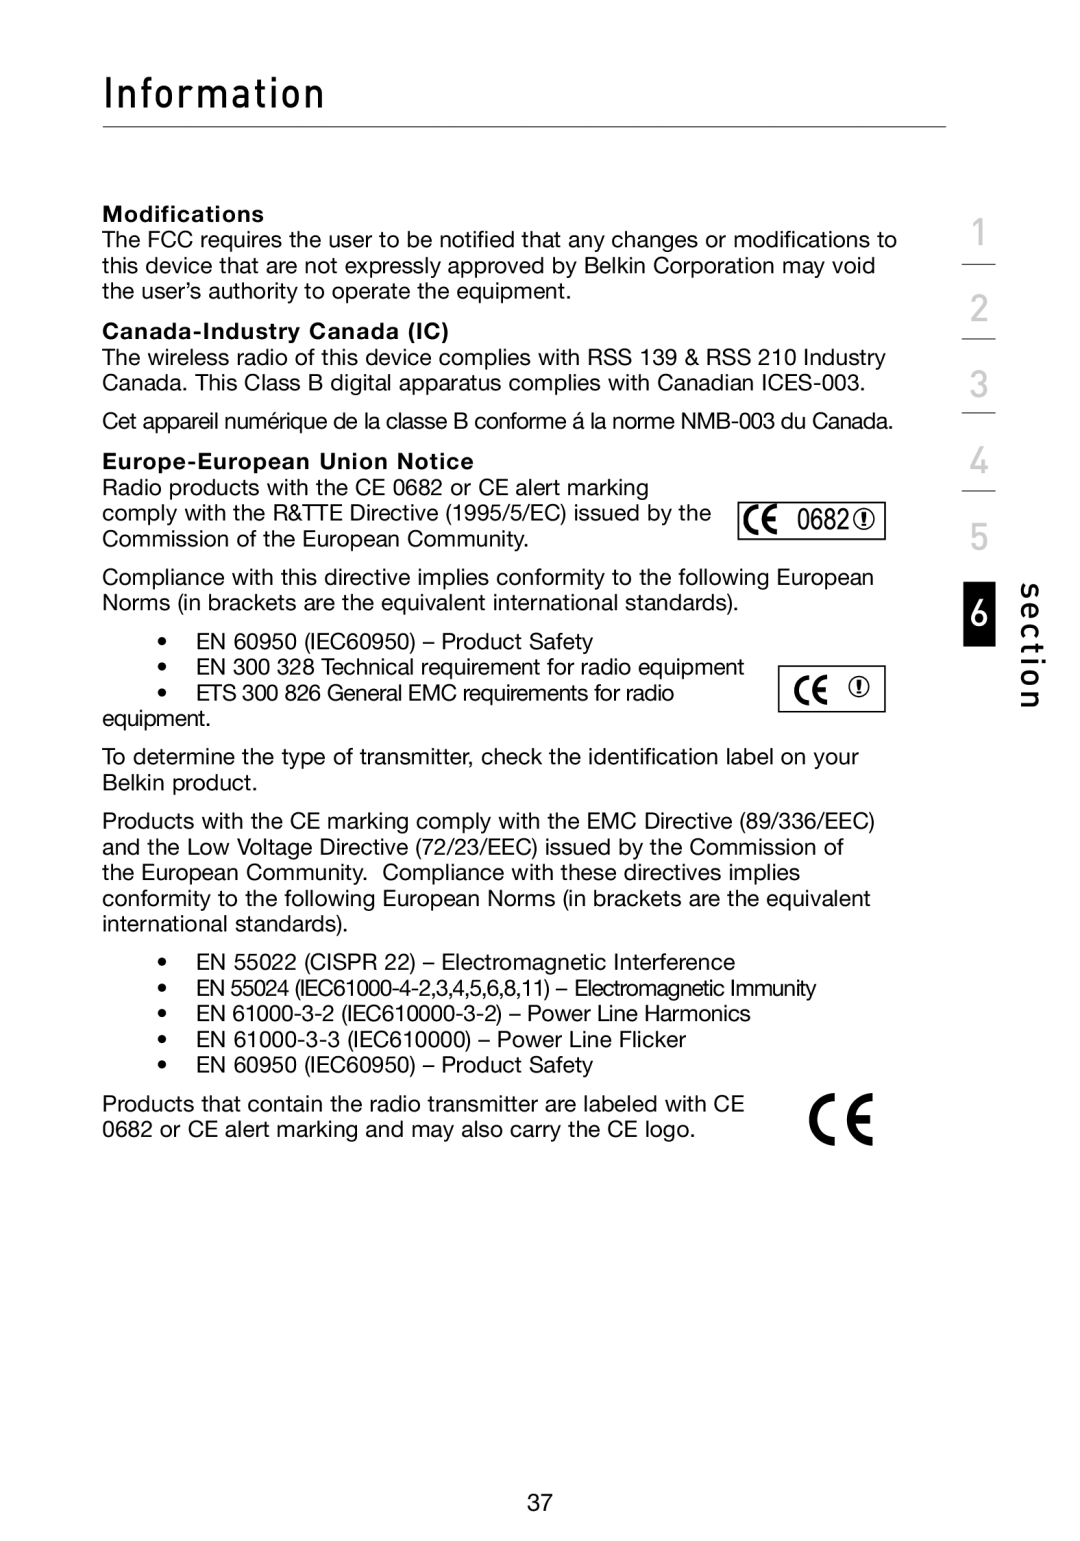 Belkin F5D9050 user manual Information, section, Modifications, Canada-Industry Canada IC, Europe-European Union Notice 